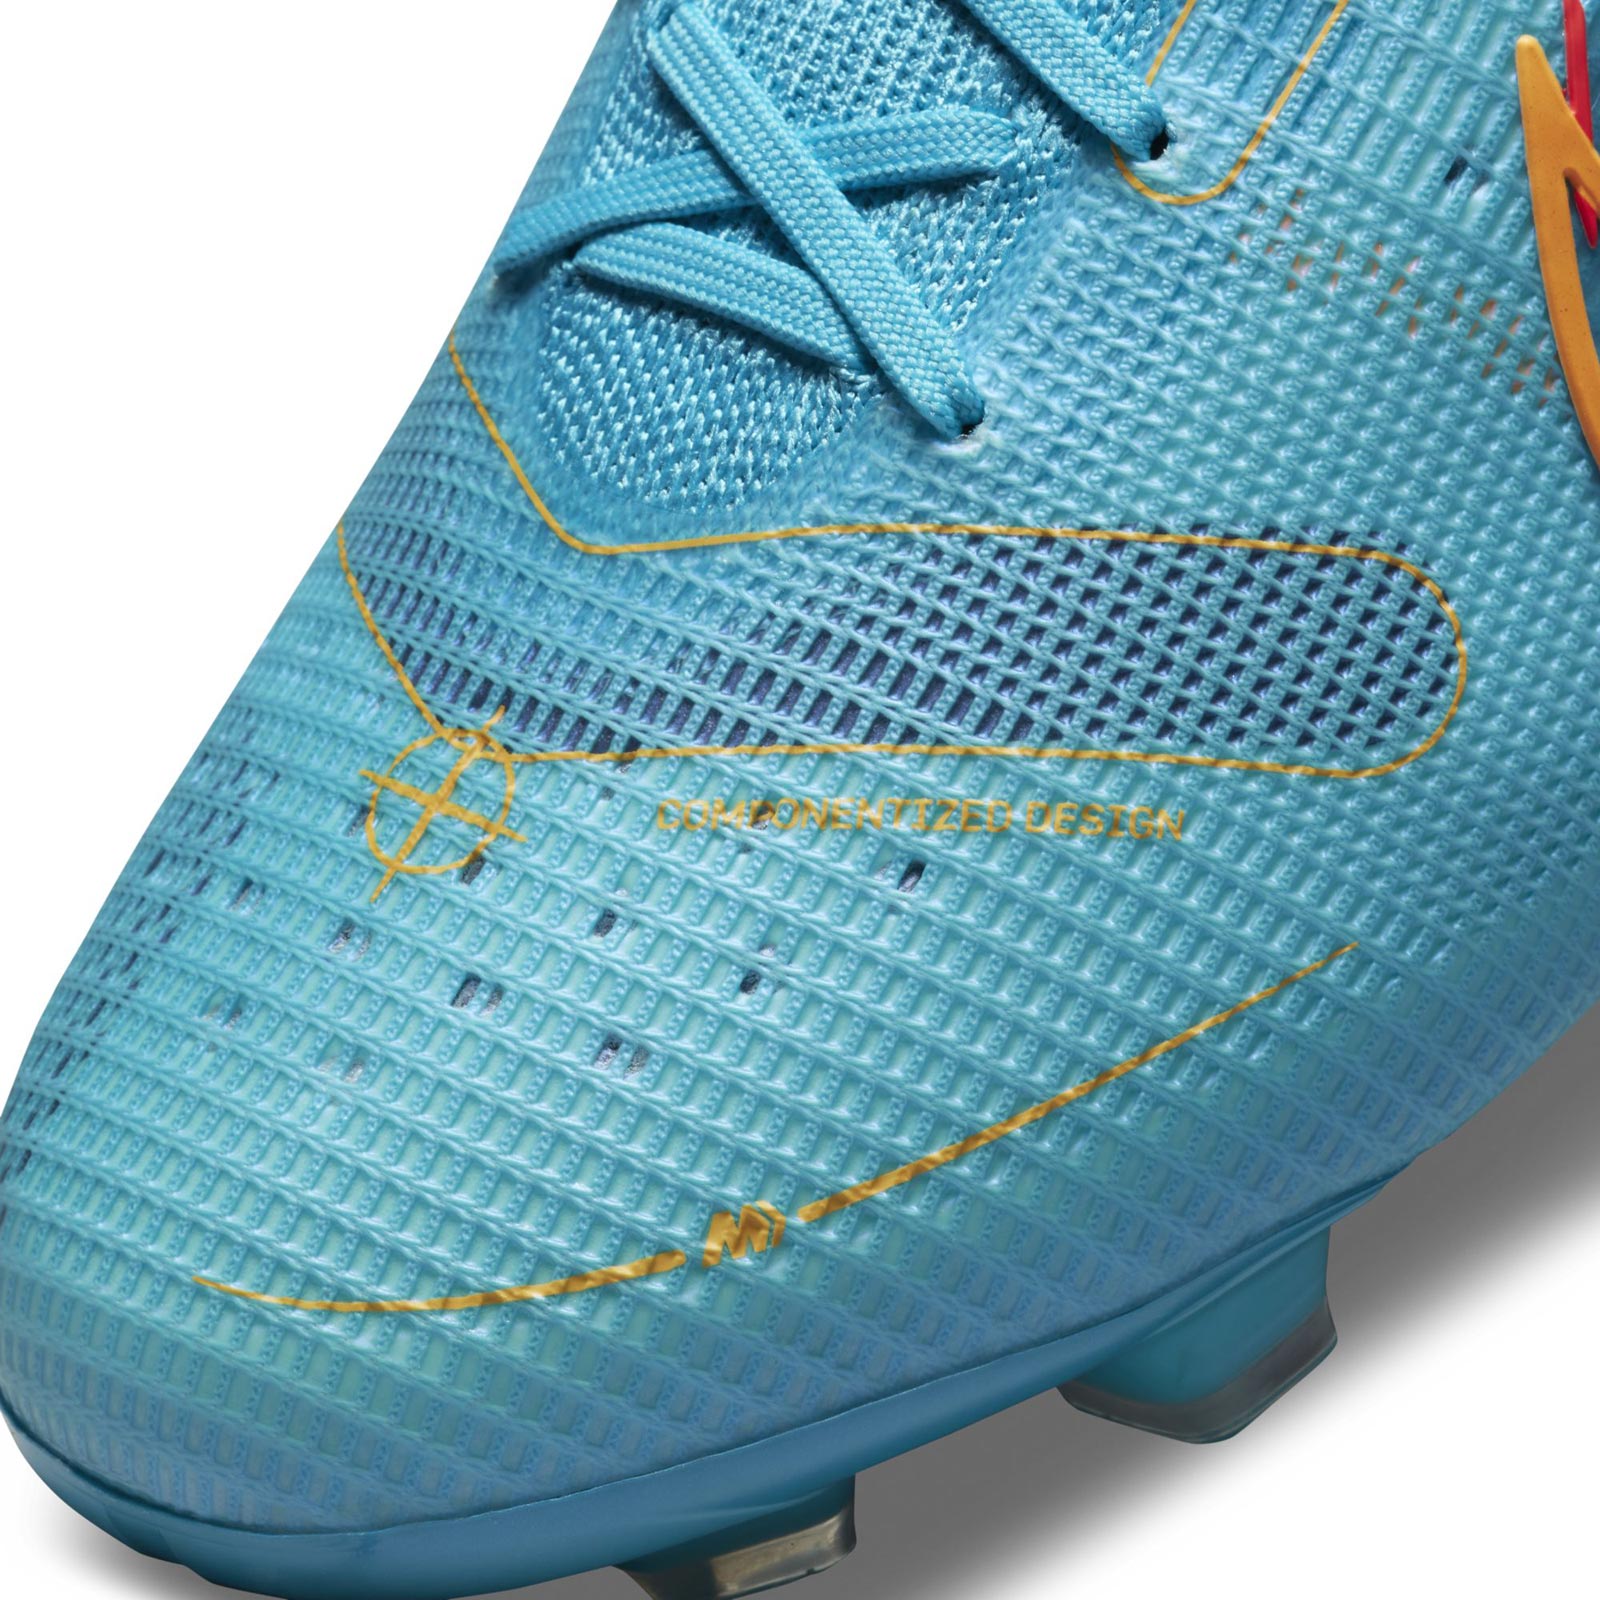 NIKE MERCURIAL SUPERFLY 8 ELITE FIRM-GROUND FOOTBALL BOOTS